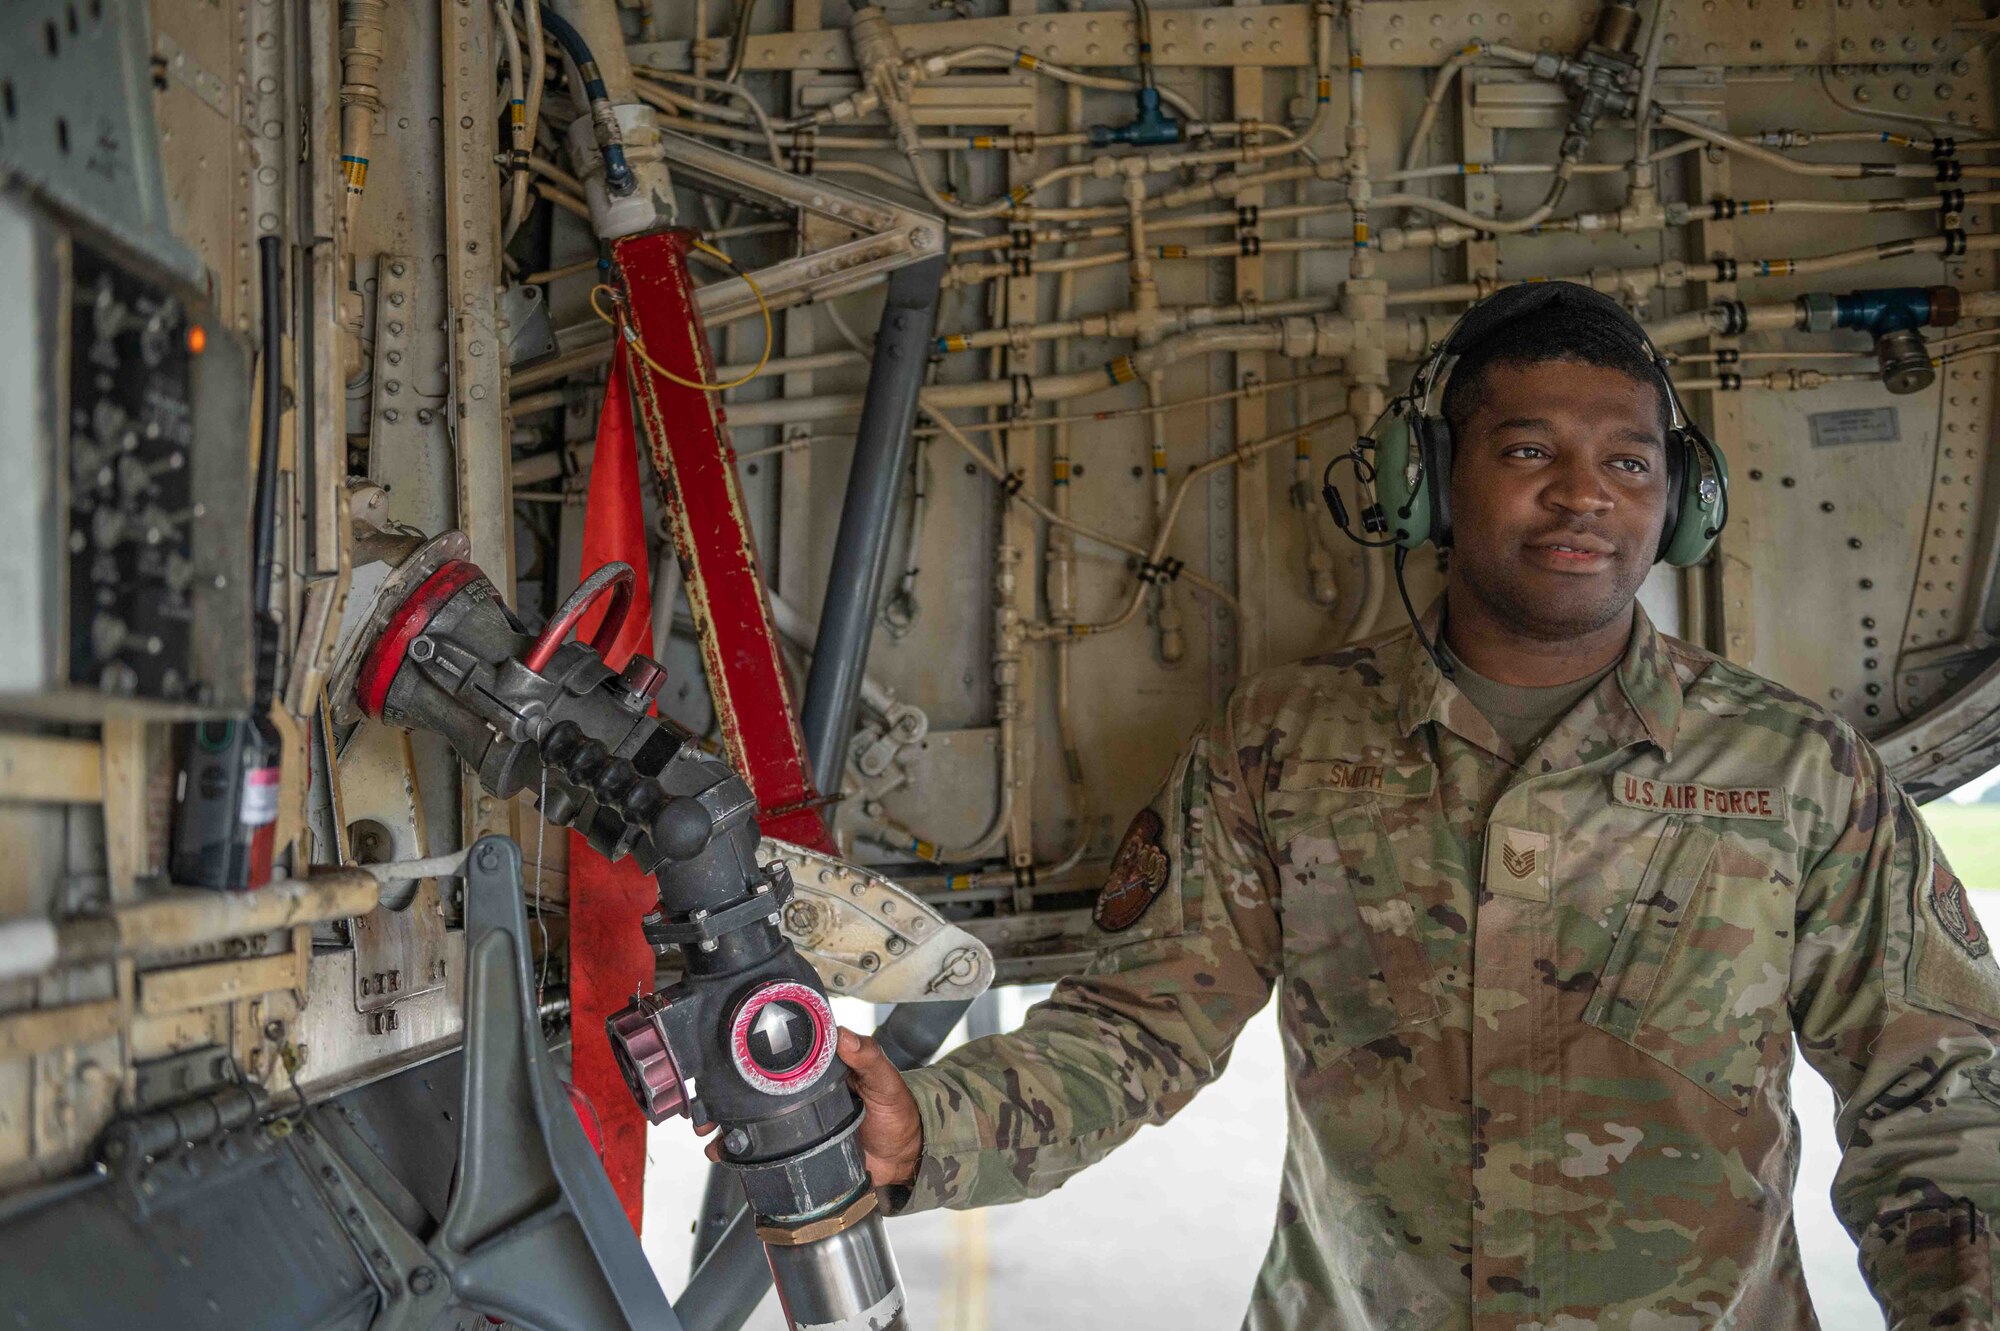 Airman holds a fuel hose up to an aircraft